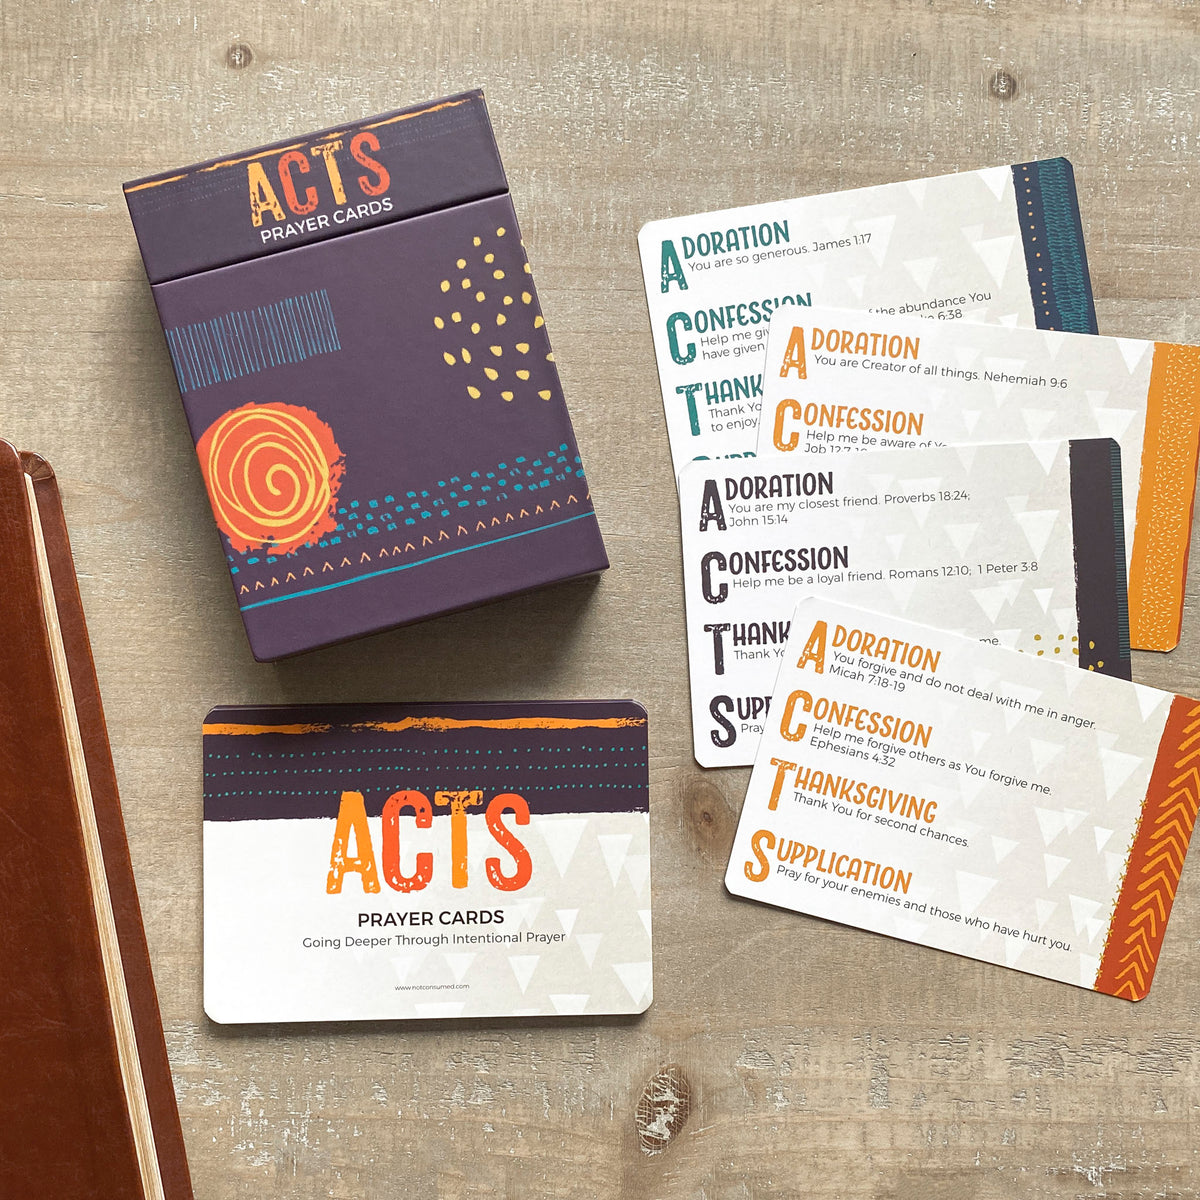 ACTS Prayer Cards